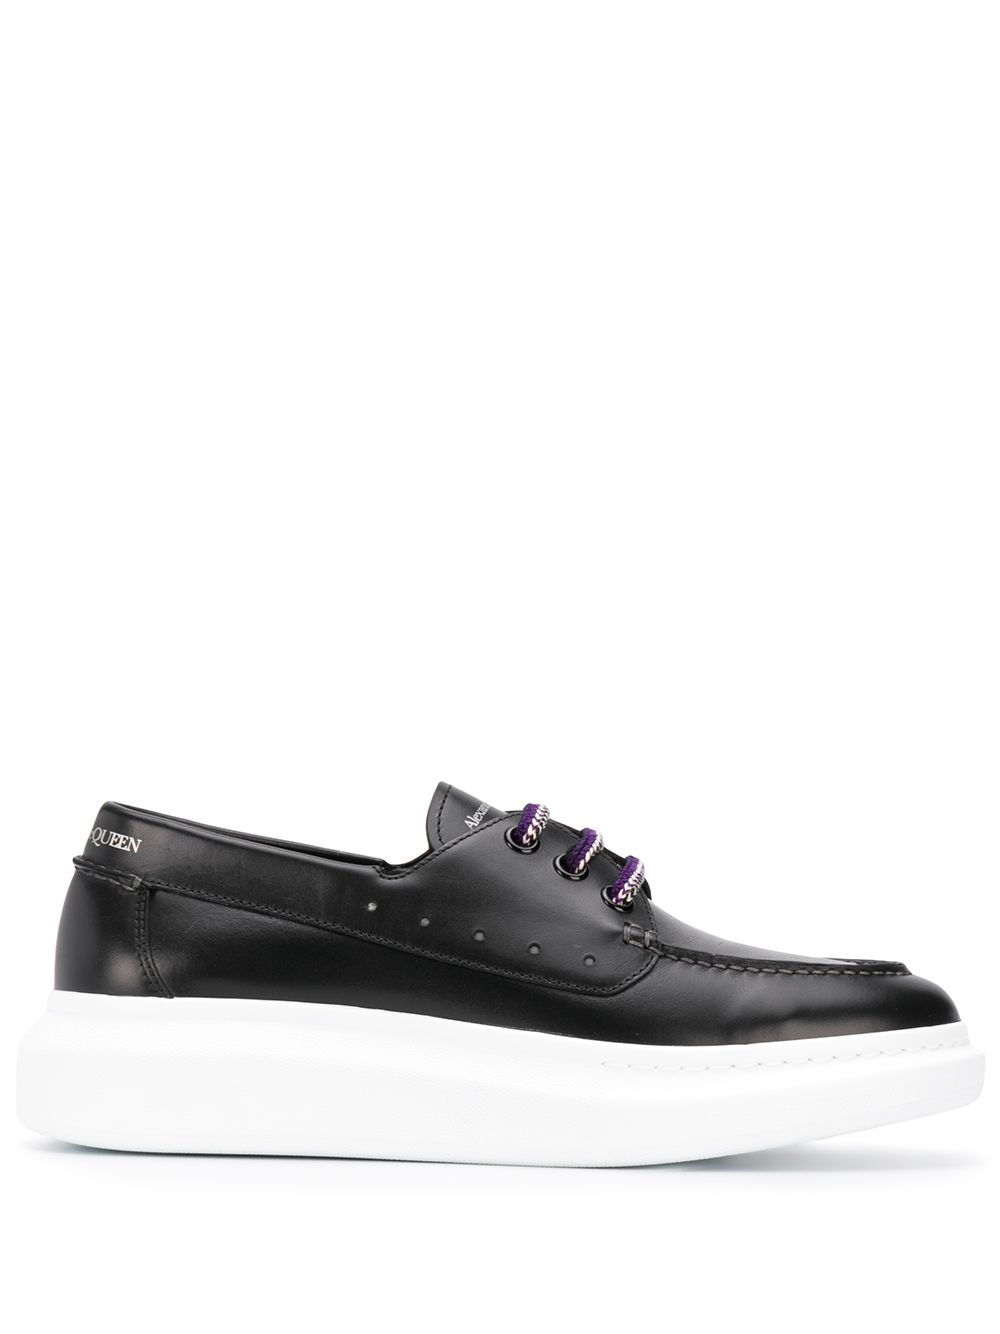 ALEXANDER MCQUEEN CHUNKY RUBBER SOLE LACE-UP SHOES